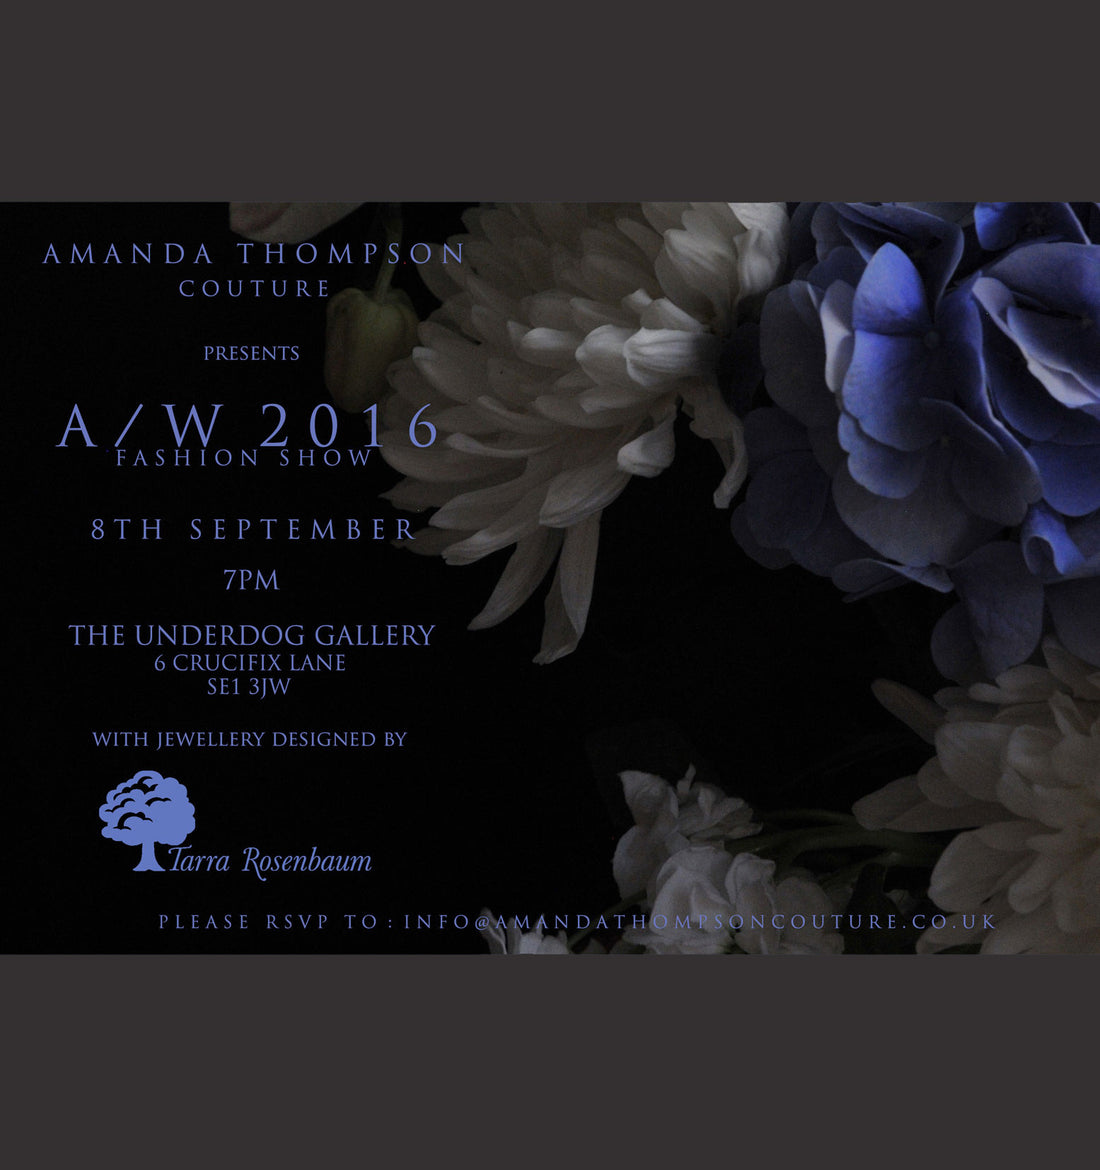 Announcement for the runway show of Amanda Thompson couture AW2016 